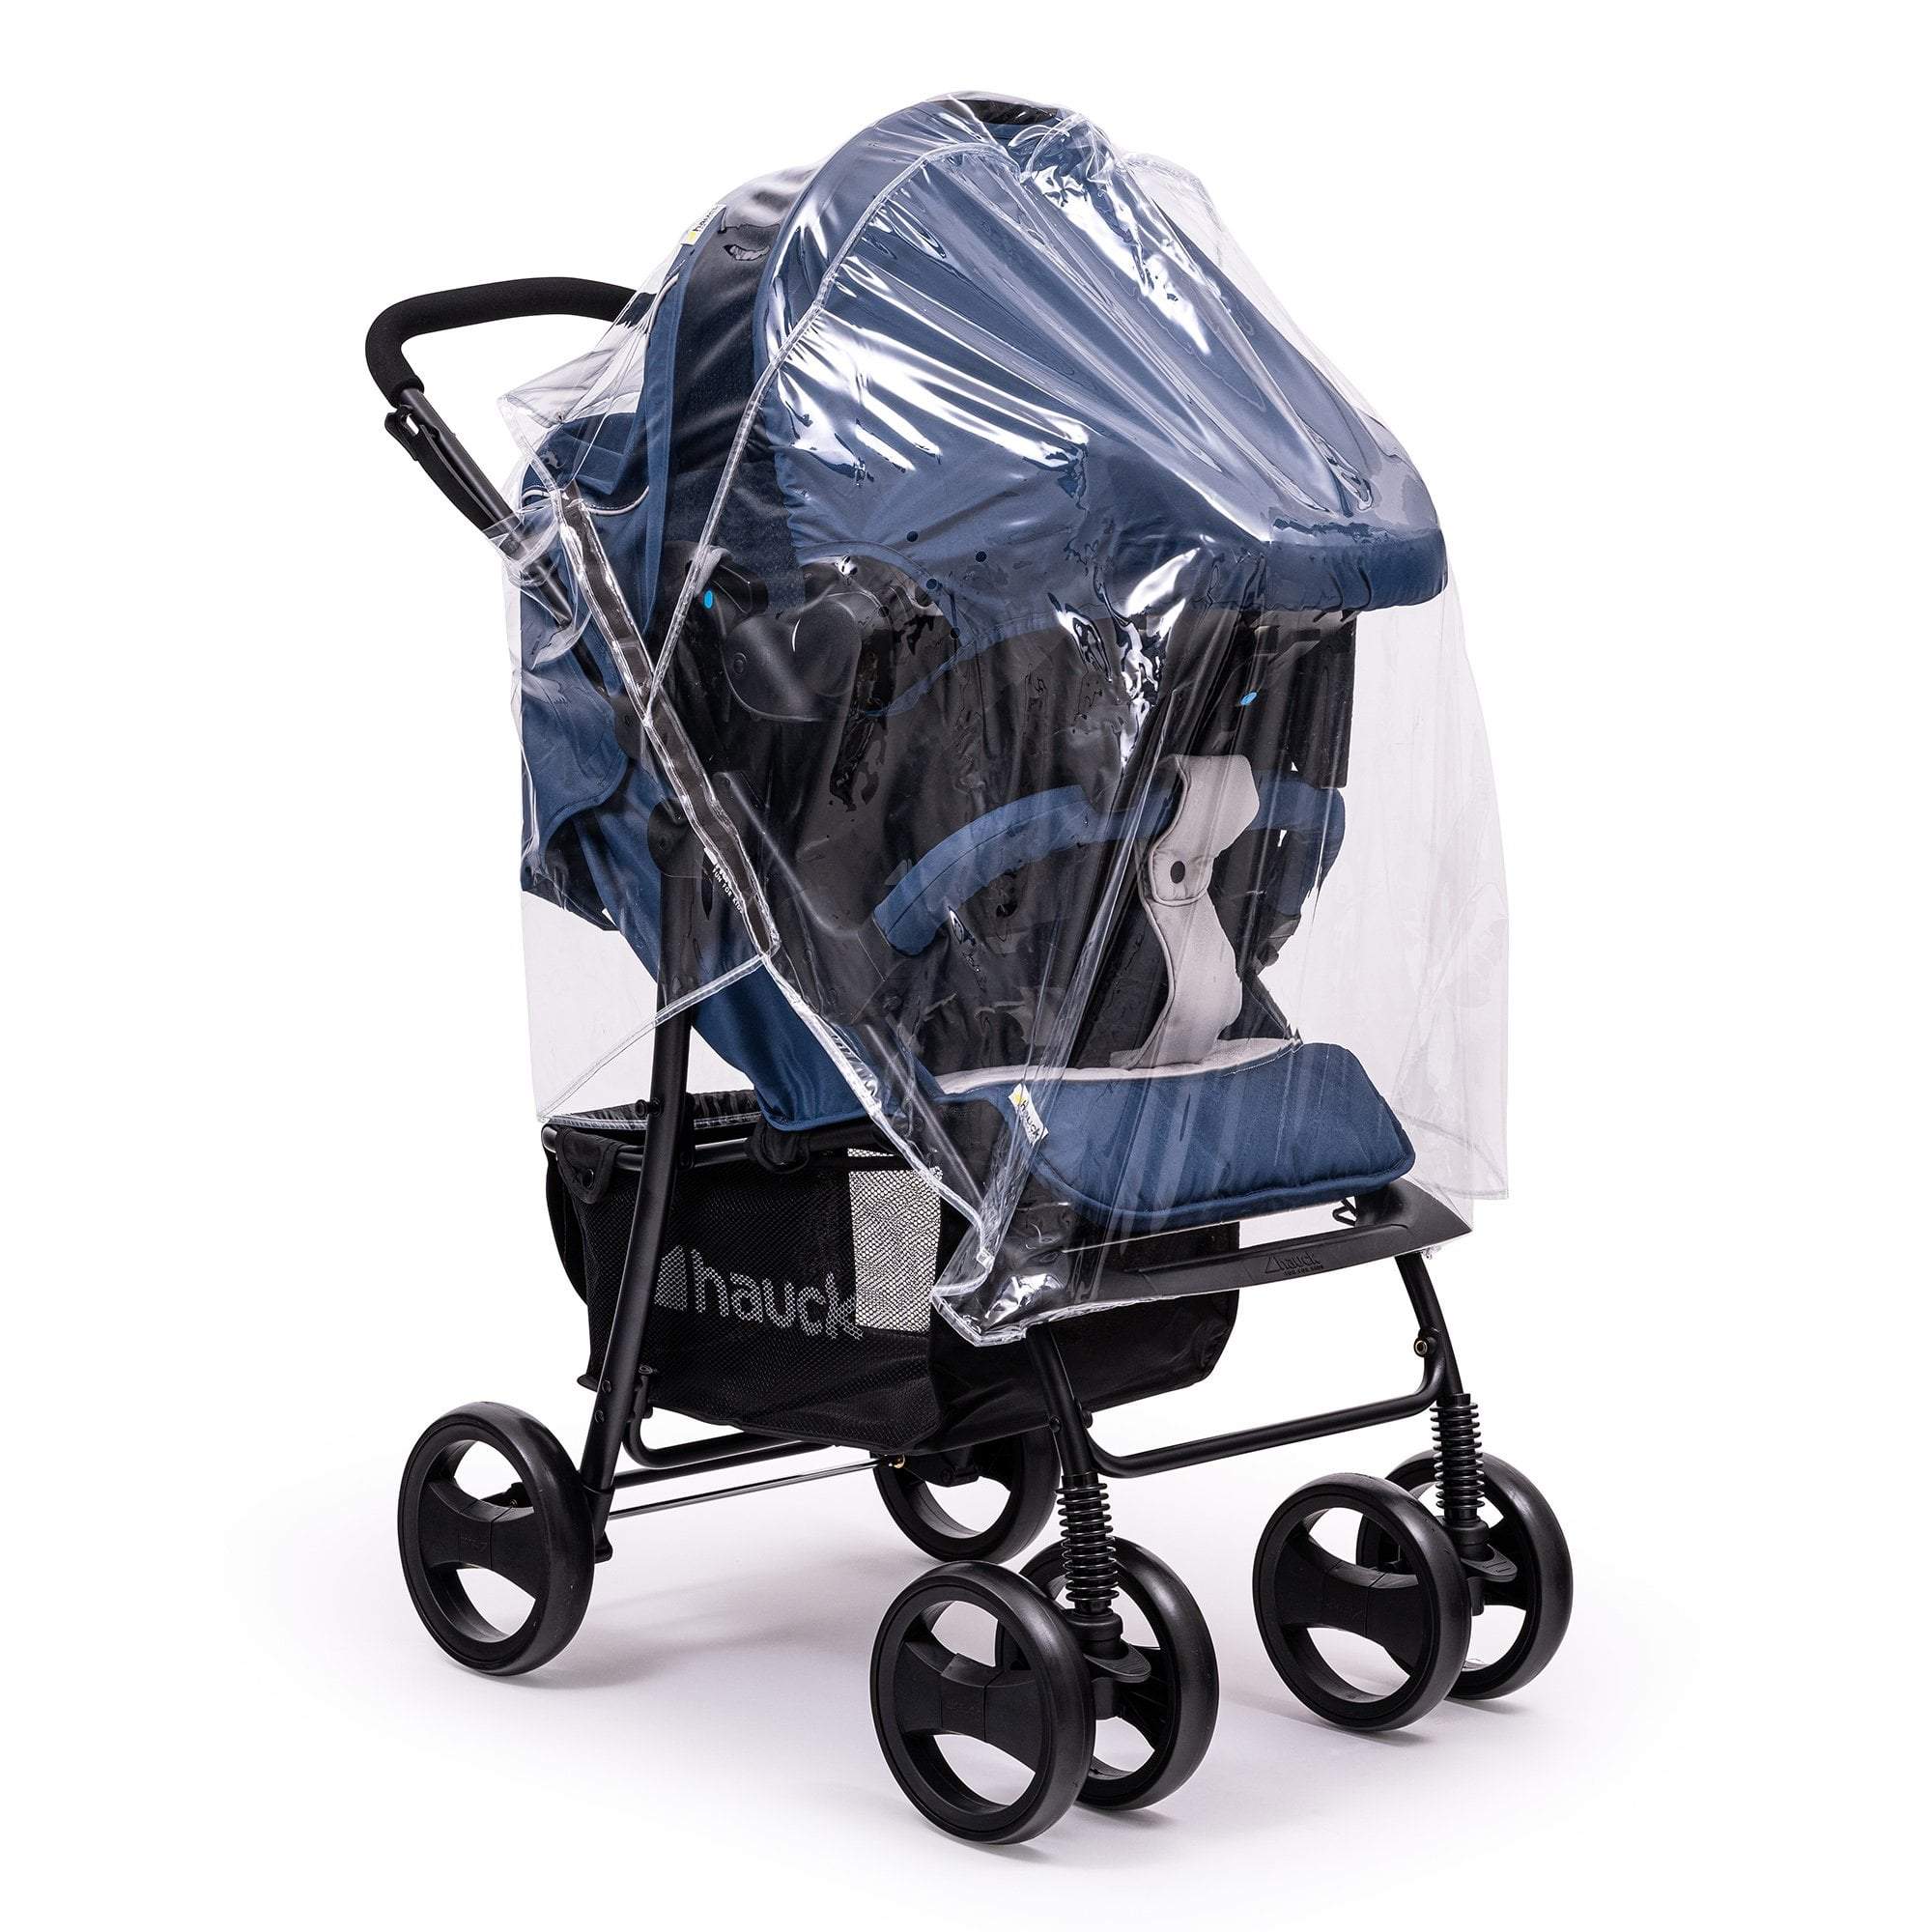 Travel System Raincover Compatible with Brio - Fits All Models -  | For Your Little One